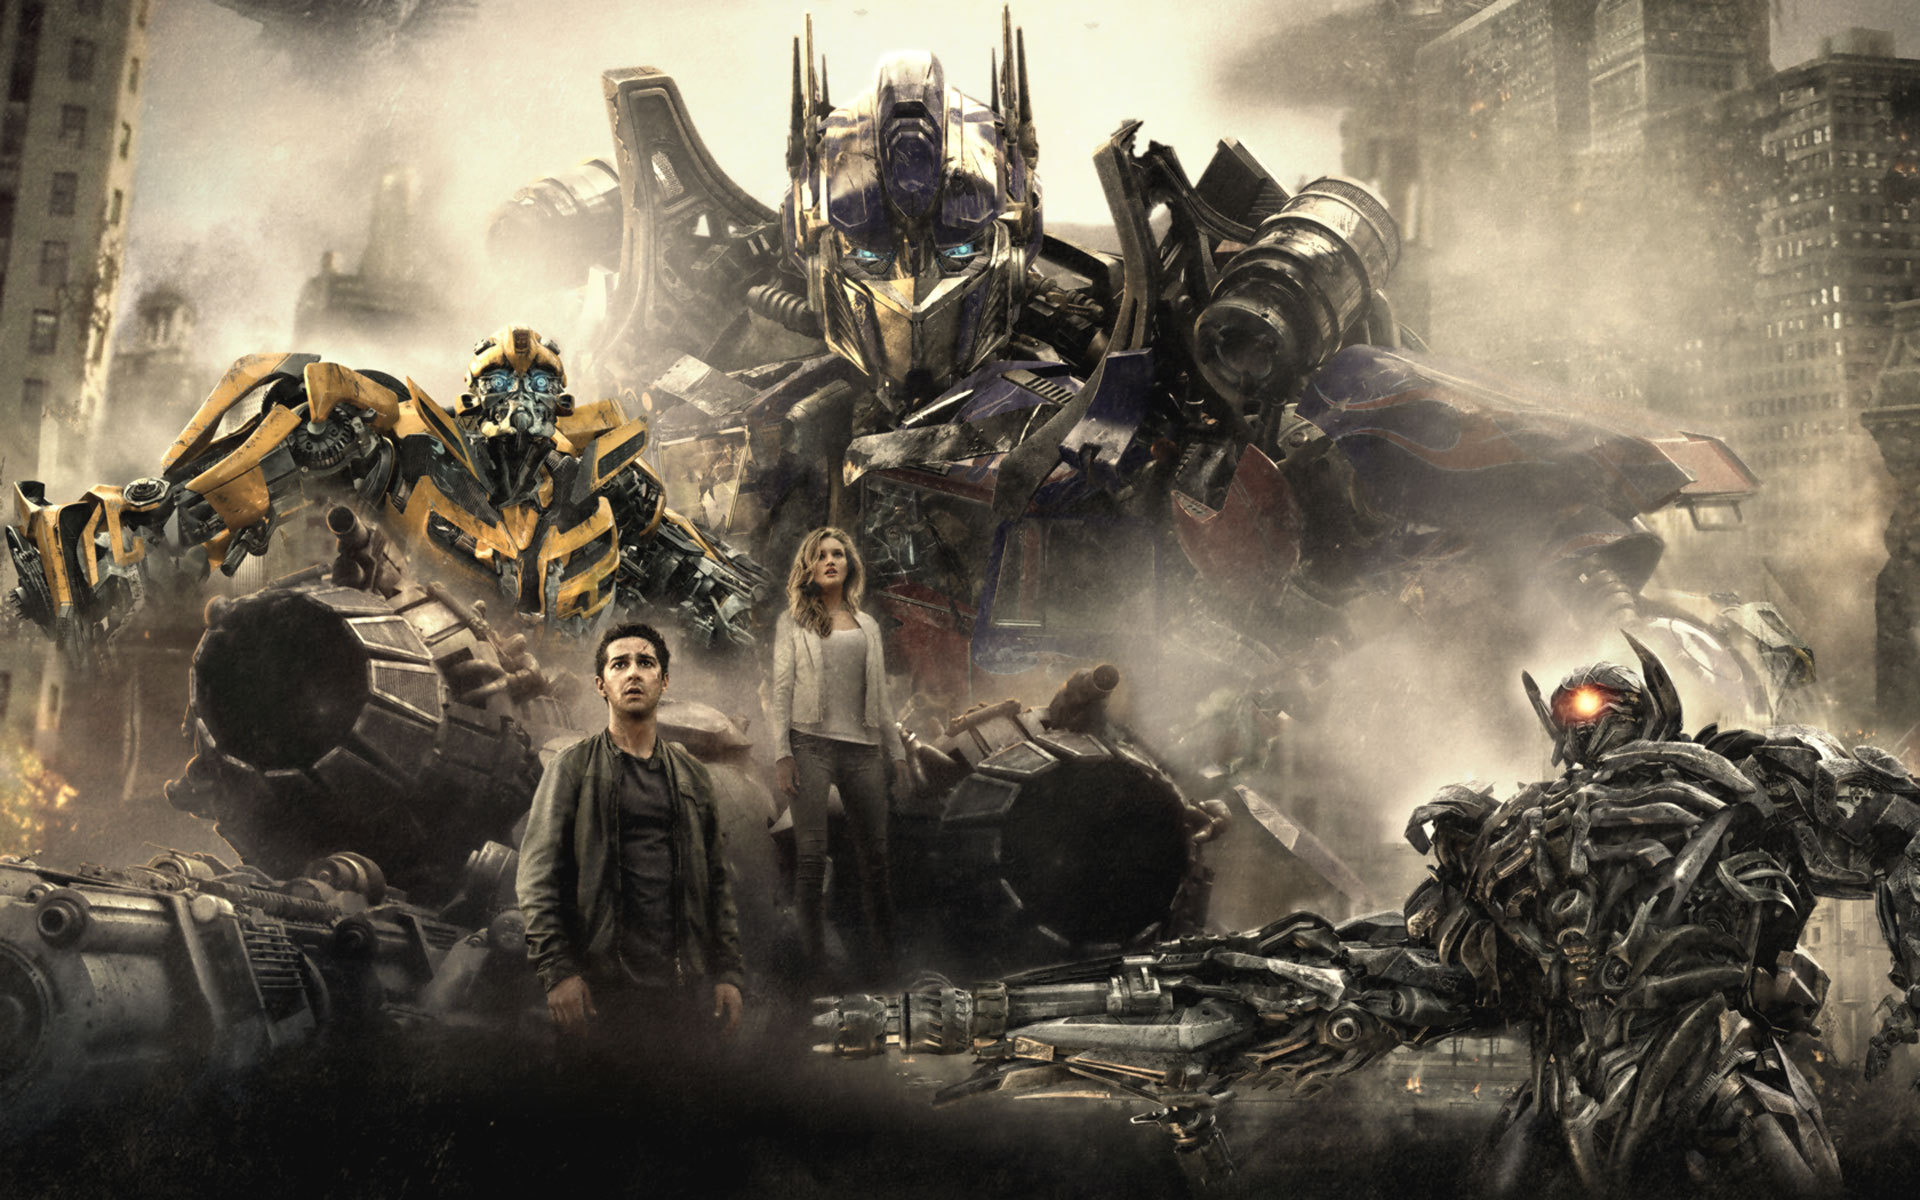 Transformers: Dark Of The Moon Backgrounds, Compatible - PC, Mobile, Gadgets| 1920x1200 px